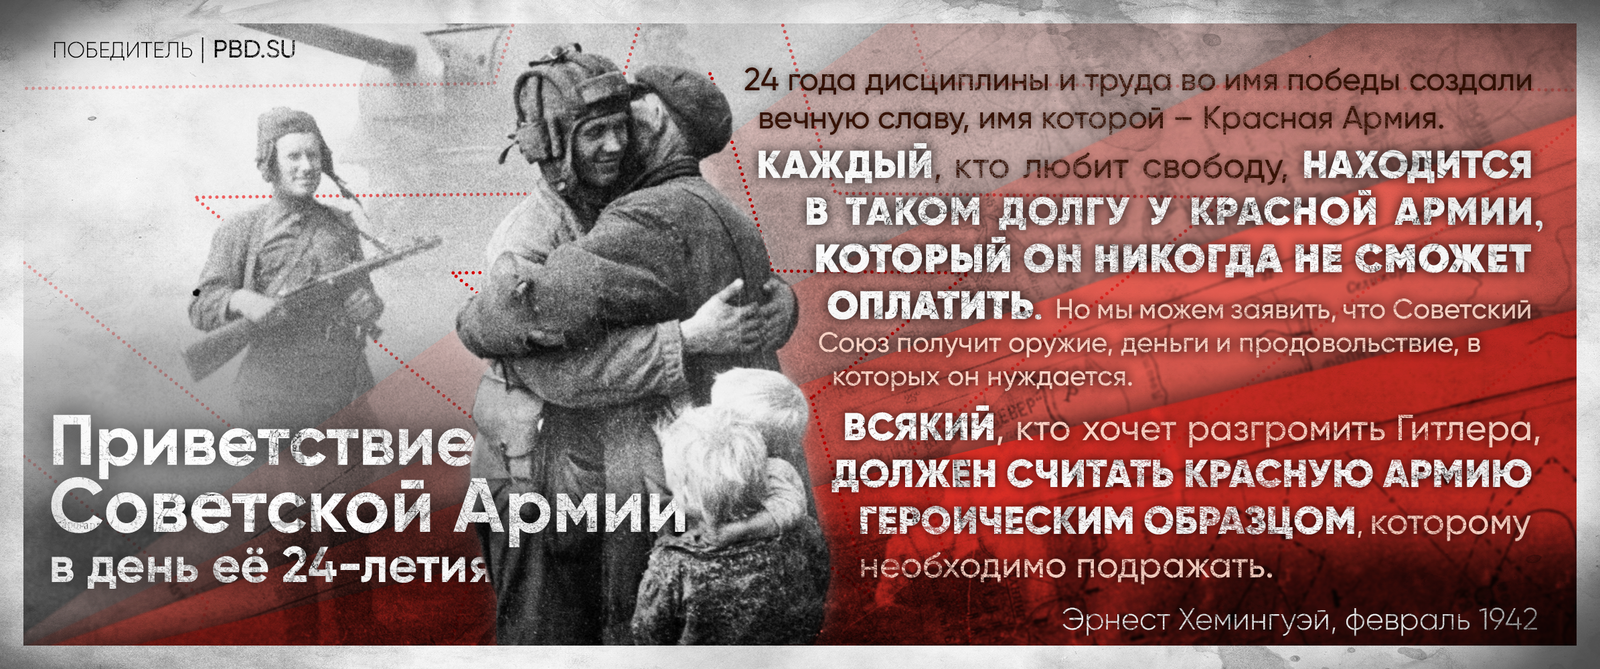 101st anniversary of the formation of the Red Army - My, Politics, Quotes, Poster, Ernest Hemingway, Red Army, Communism, Socialism, the USSR